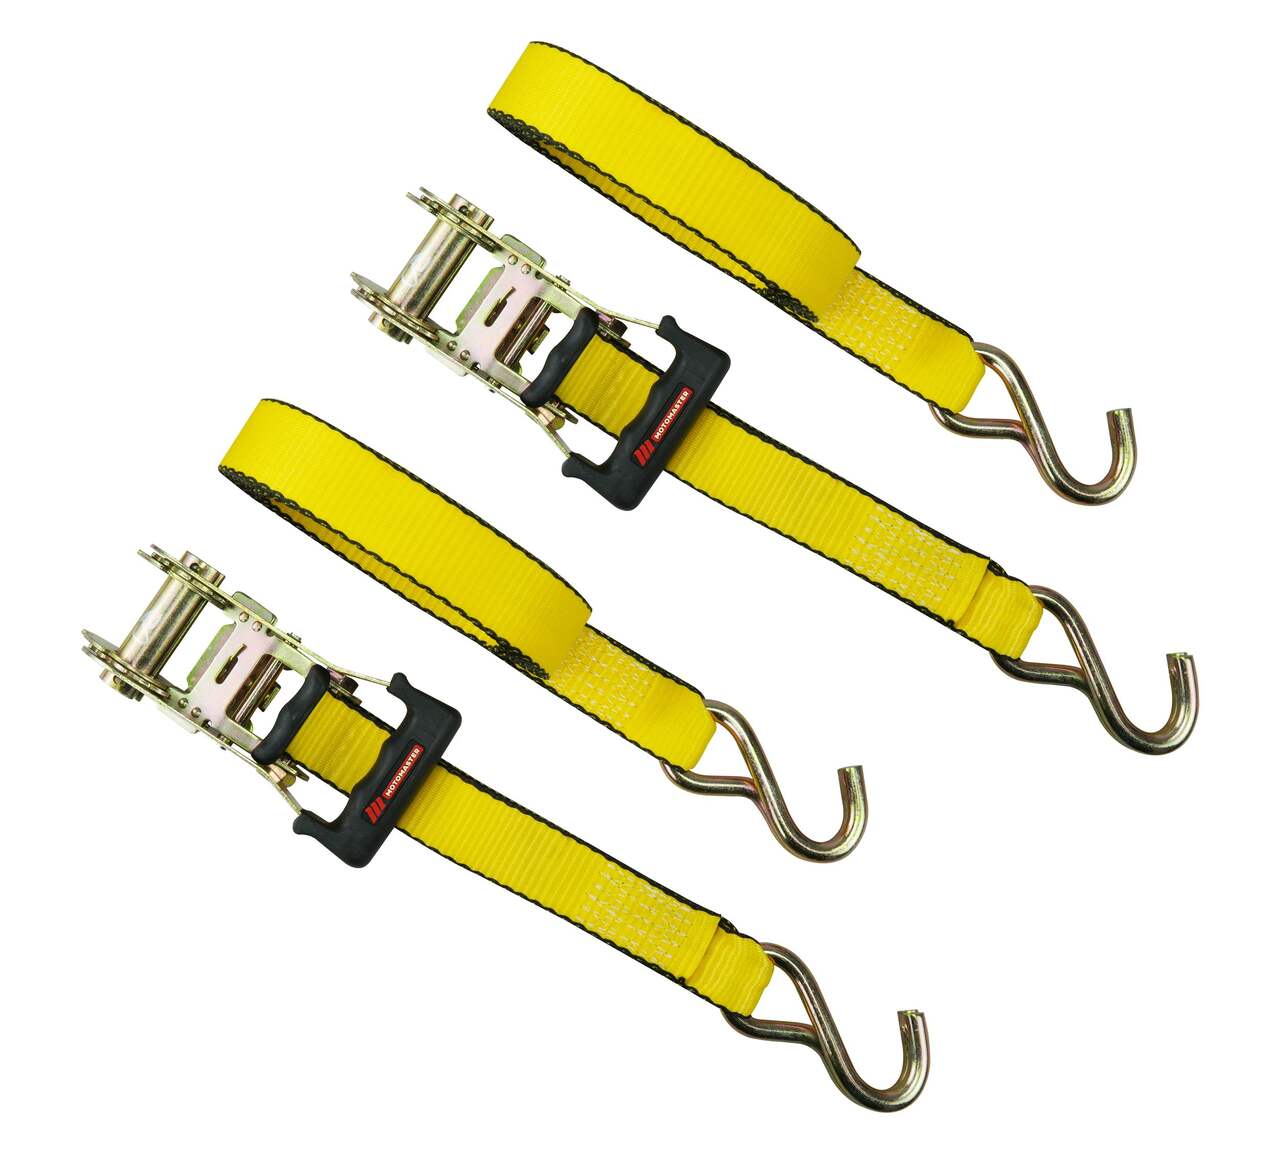 https://media-www.canadiantire.ca/product/automotive/automotive-outdoor-adventure/tarps-cords/0402724/14ft-5-000lb-ratchetx-tie-downs-2pk-ade52684-9e06-4d7c-a6d9-7b8f23684b3a-jpgrendition.jpg?imdensity=1&imwidth=640&impolicy=mZoom